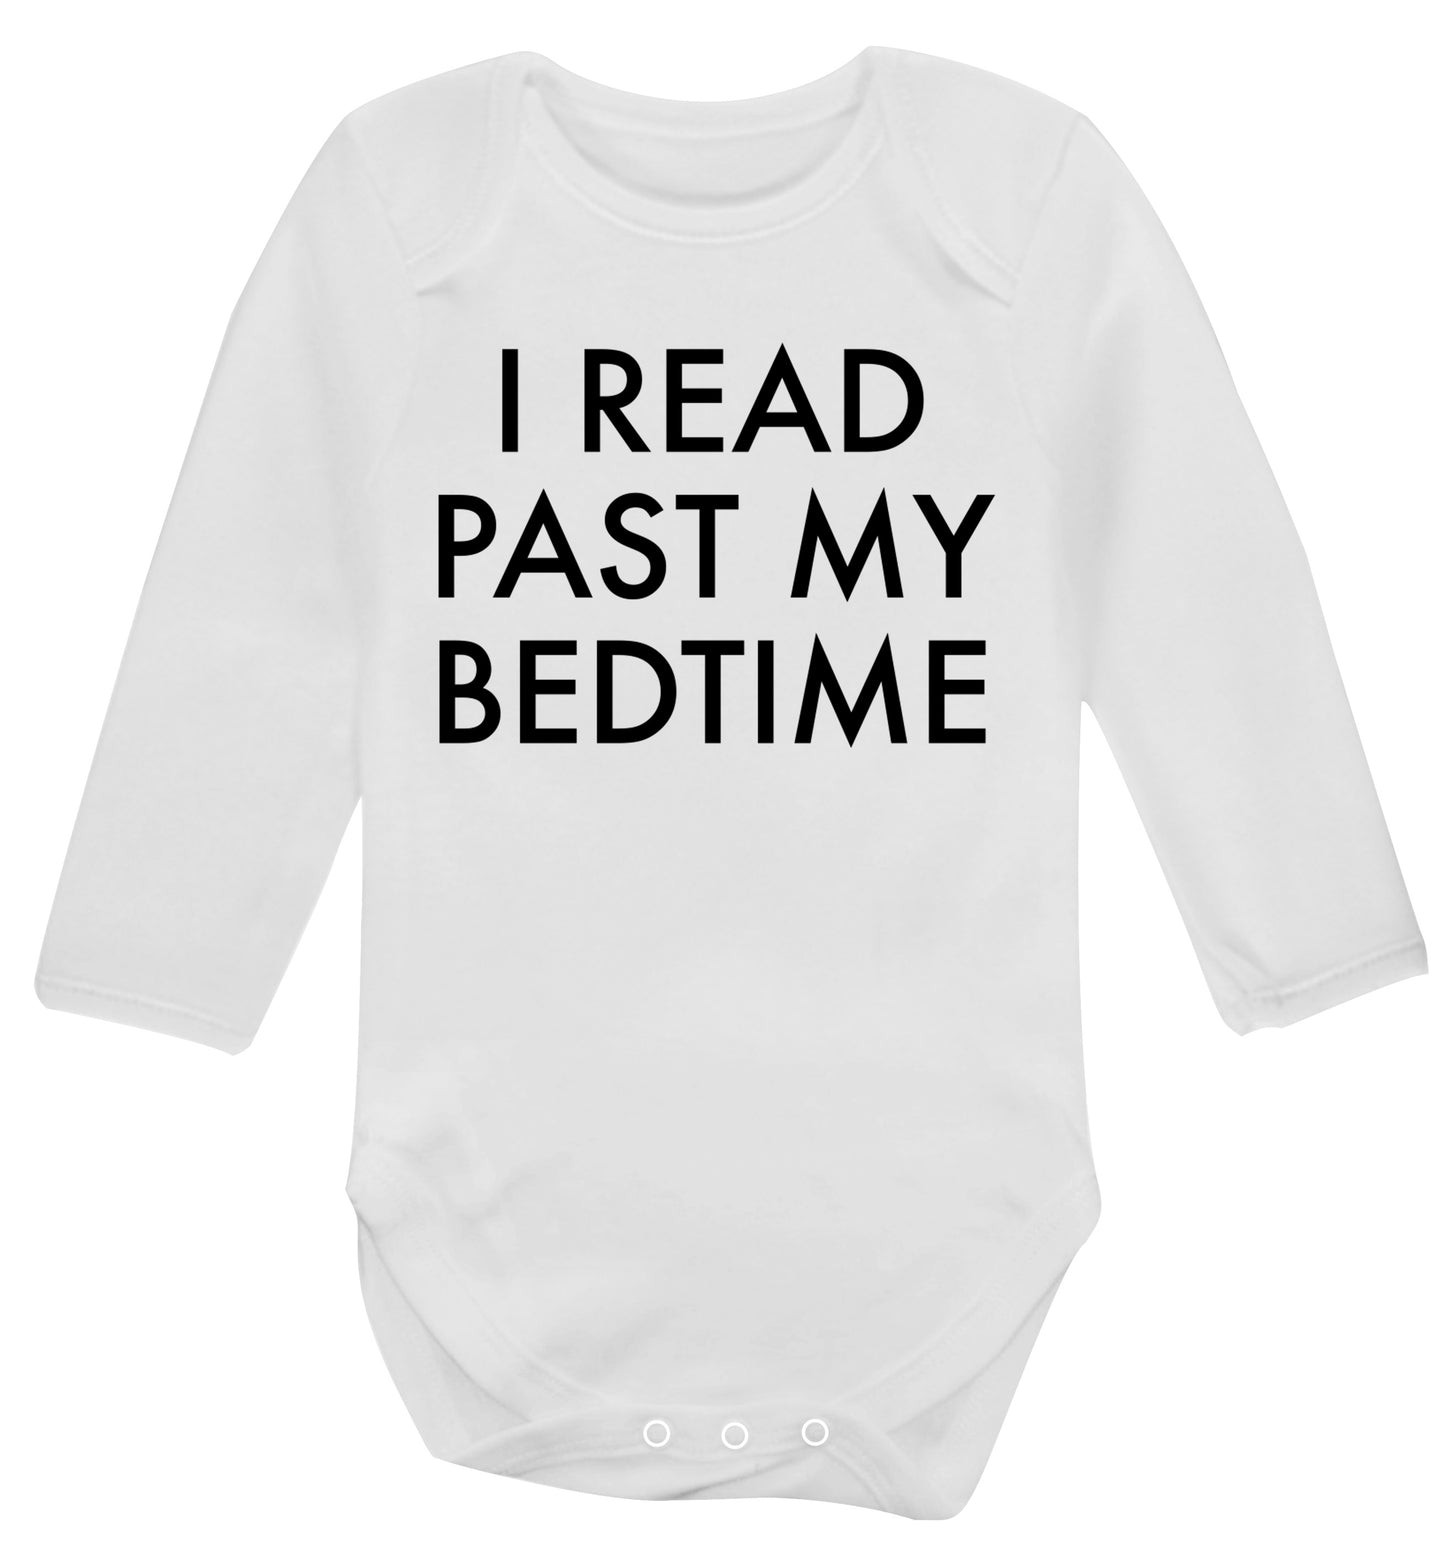 I read past my bedtime Baby Vest long sleeved white 6-12 months